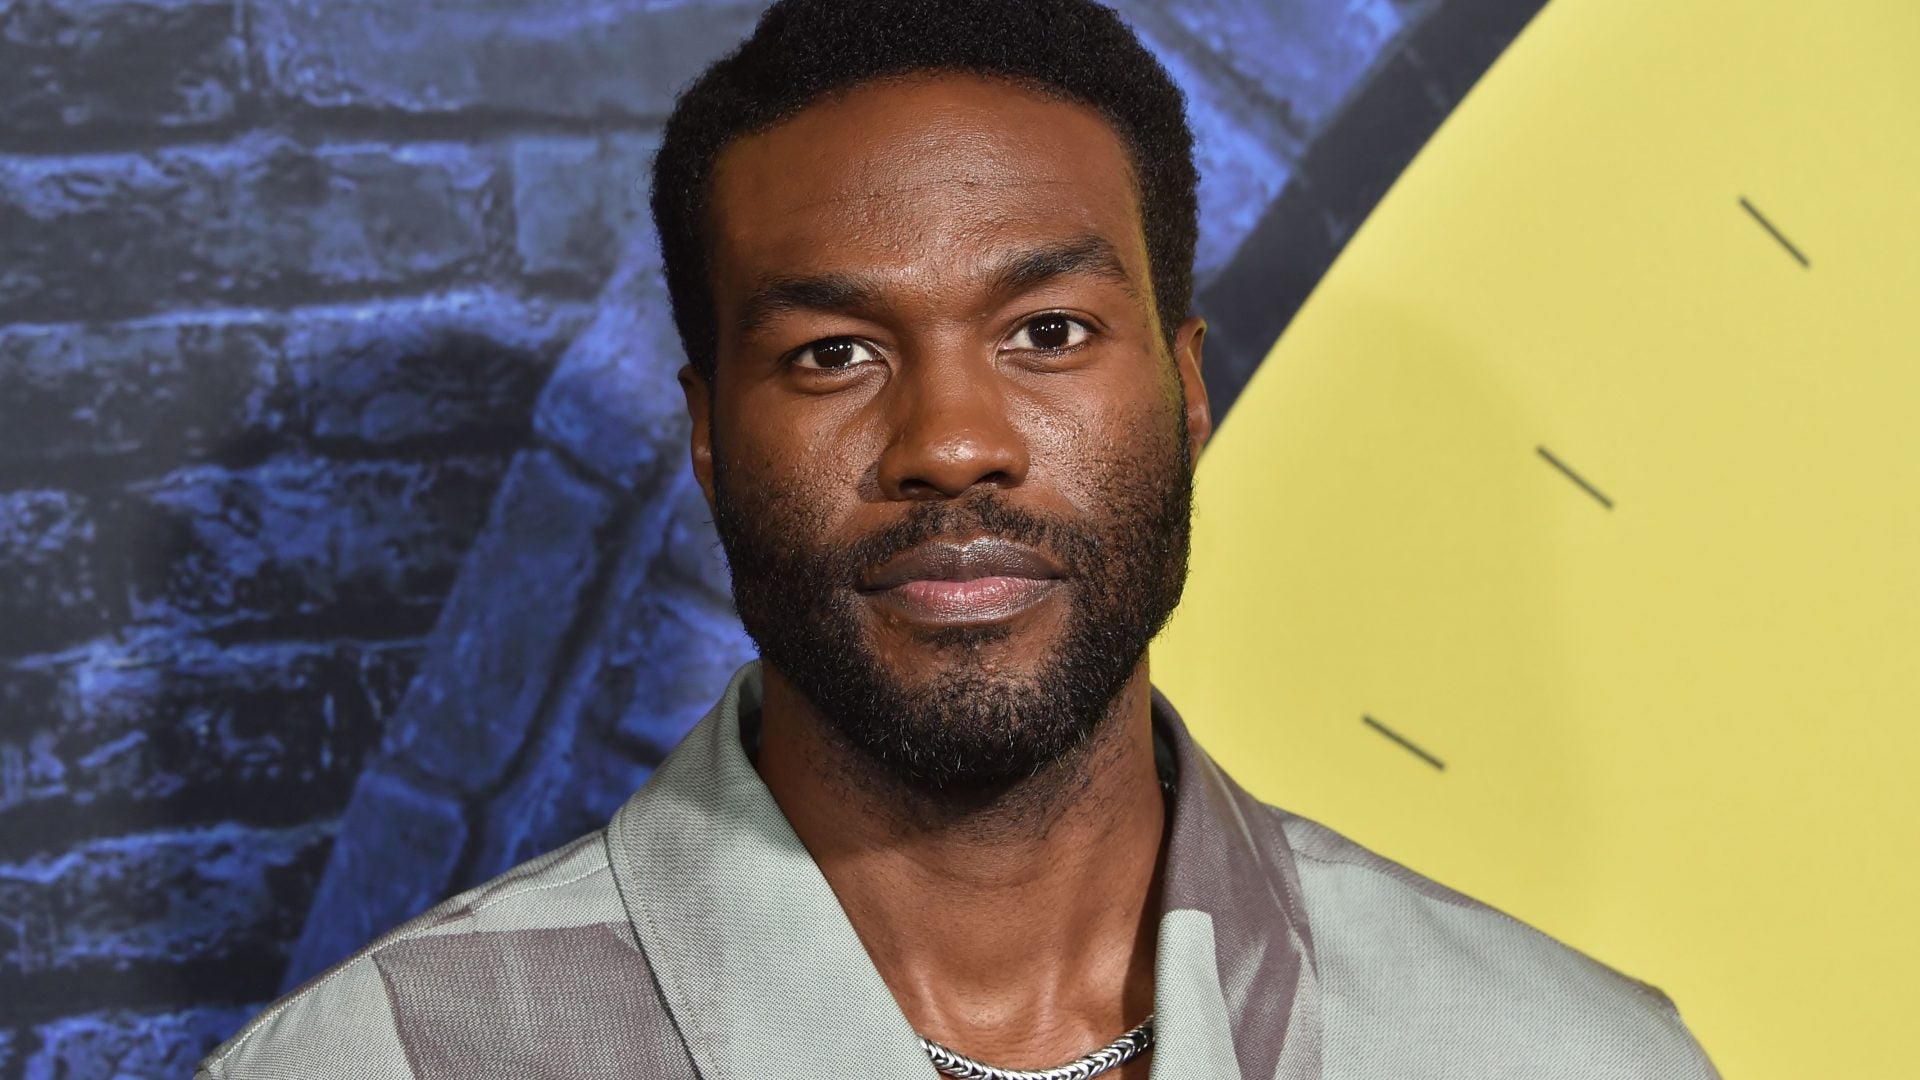 12 Facts You Didn't Know About Sexy 'Watchmen' Star Yahya Abdul-Mateen II